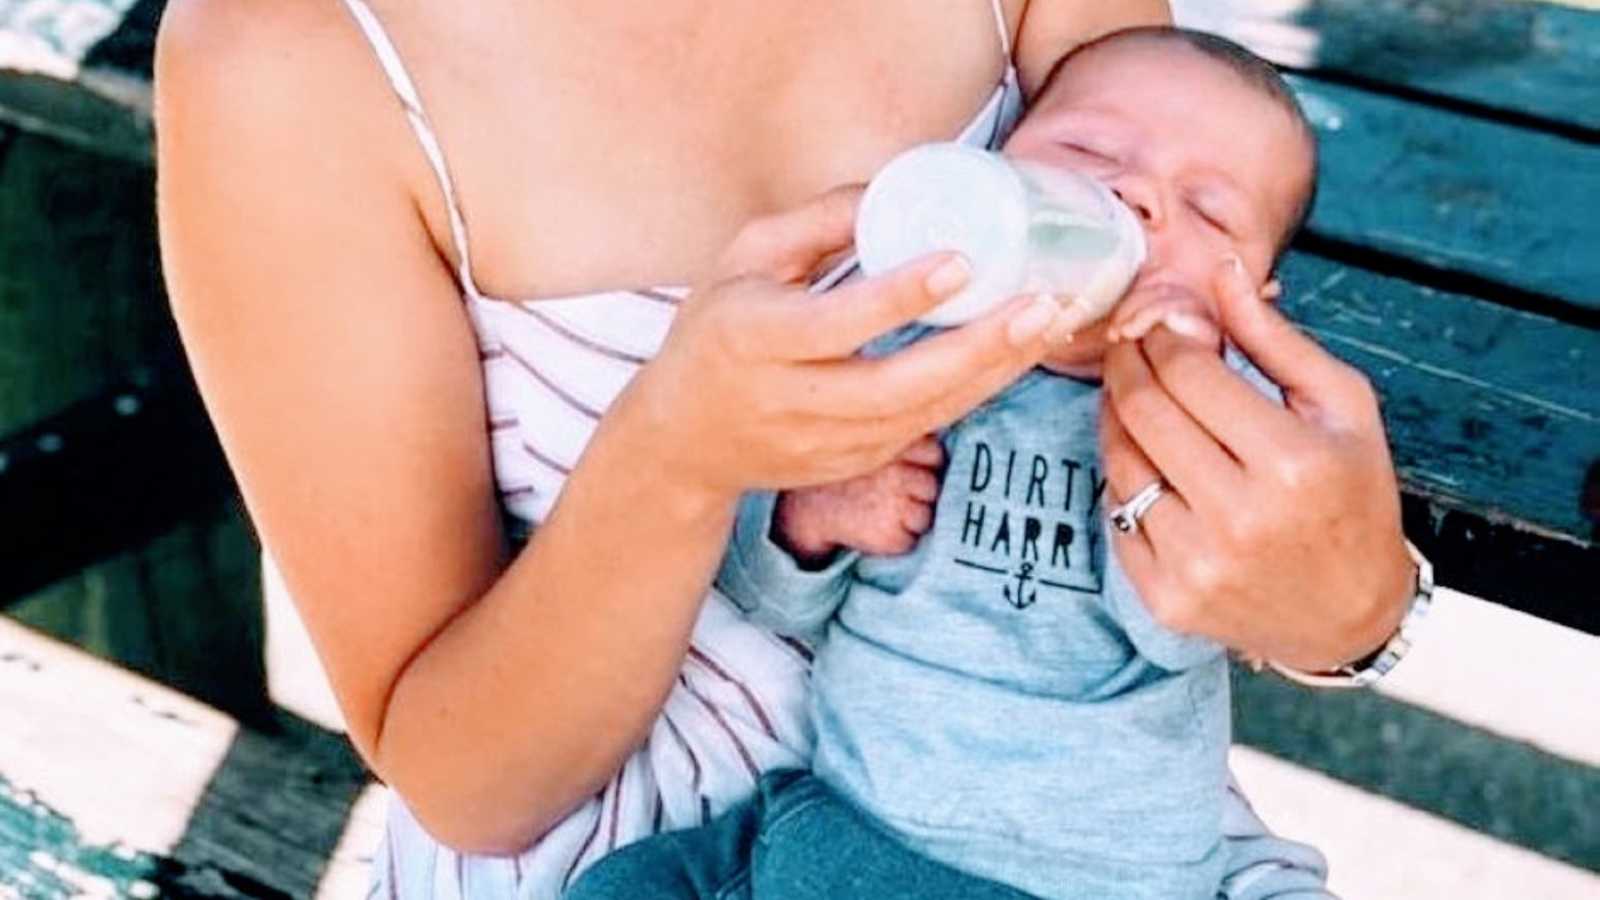 Newborn son peacefully bottle feeds while at a park